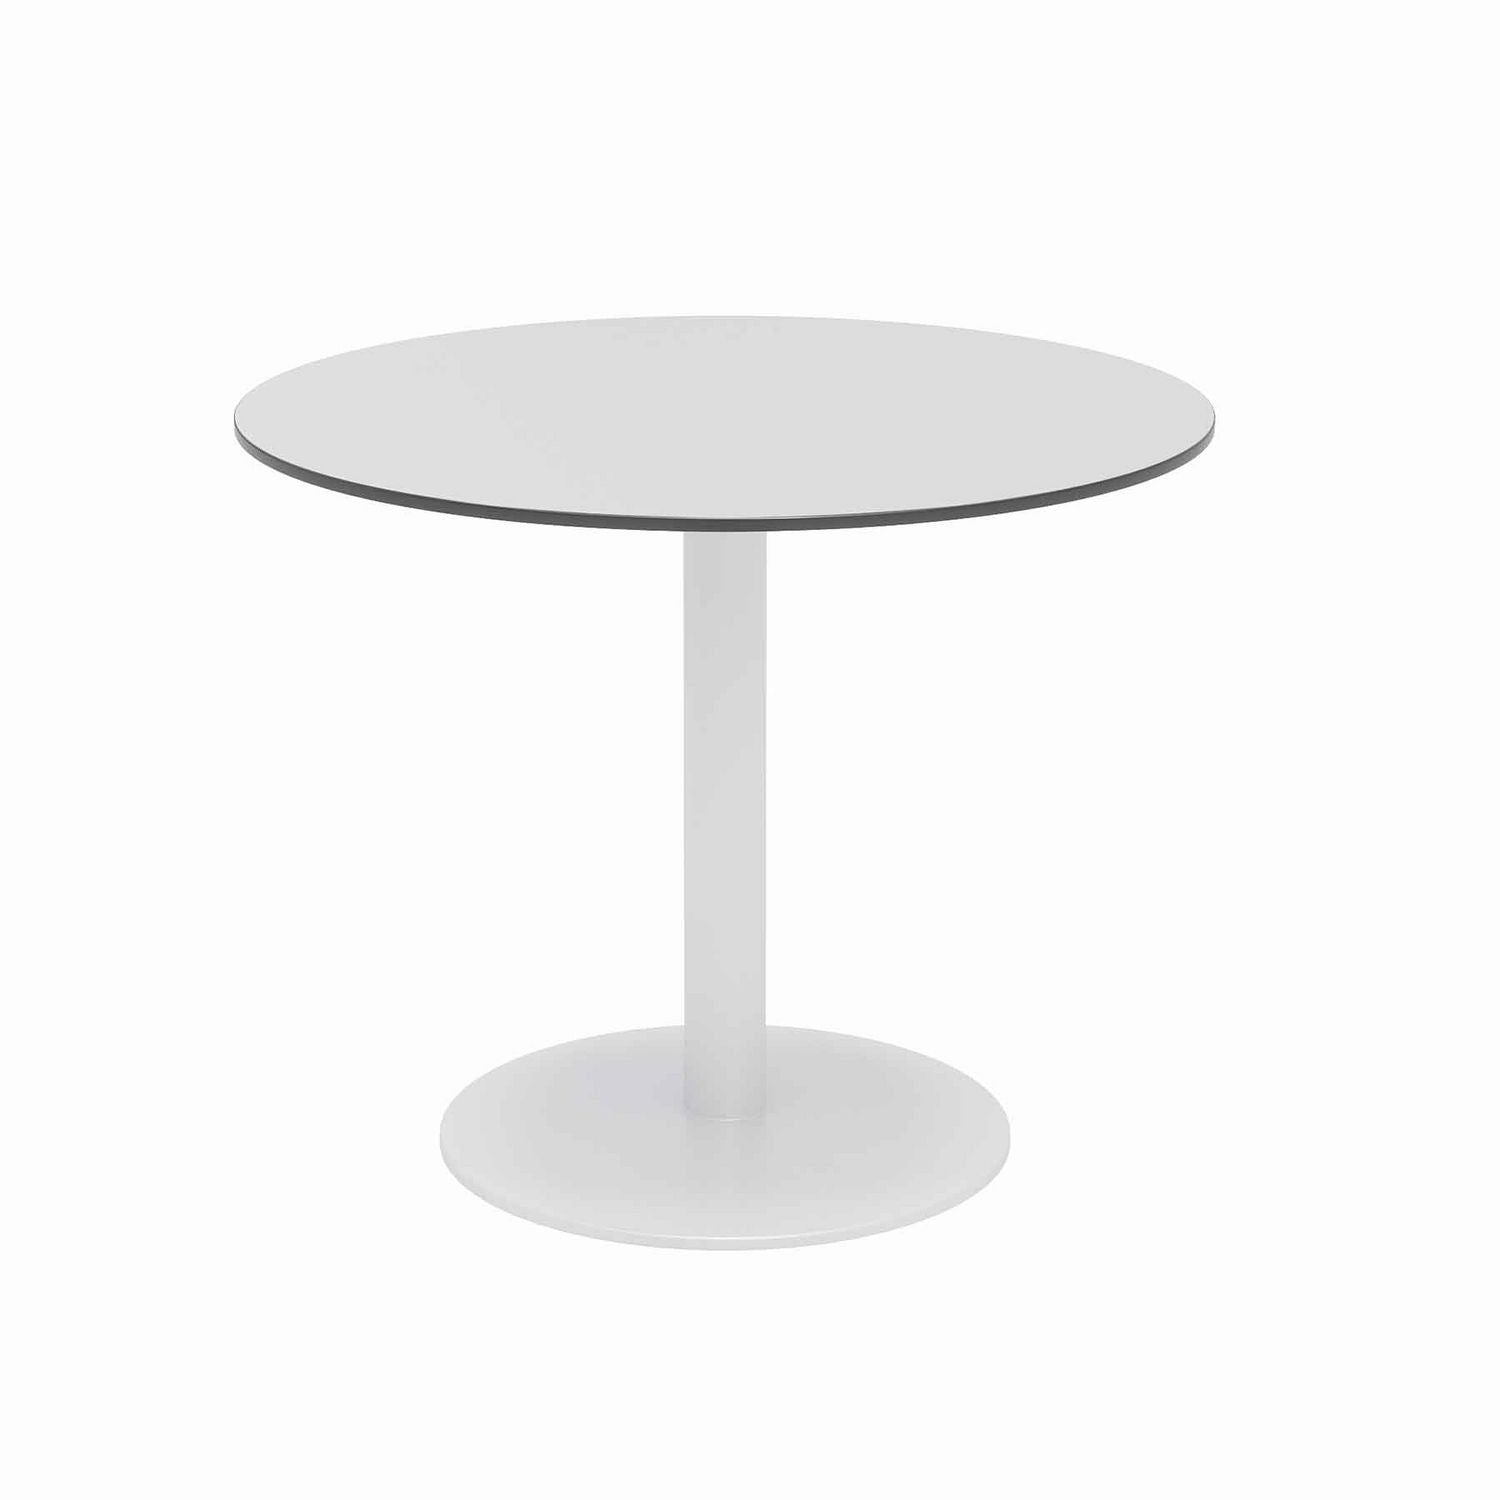 eveleen-outdoor-patio-table-w-four-gray-powder-coated-polymer-chairs-round-36-dia-x-29hwhite-ships-in-4-6-business-days_kfi840031918499 - 2